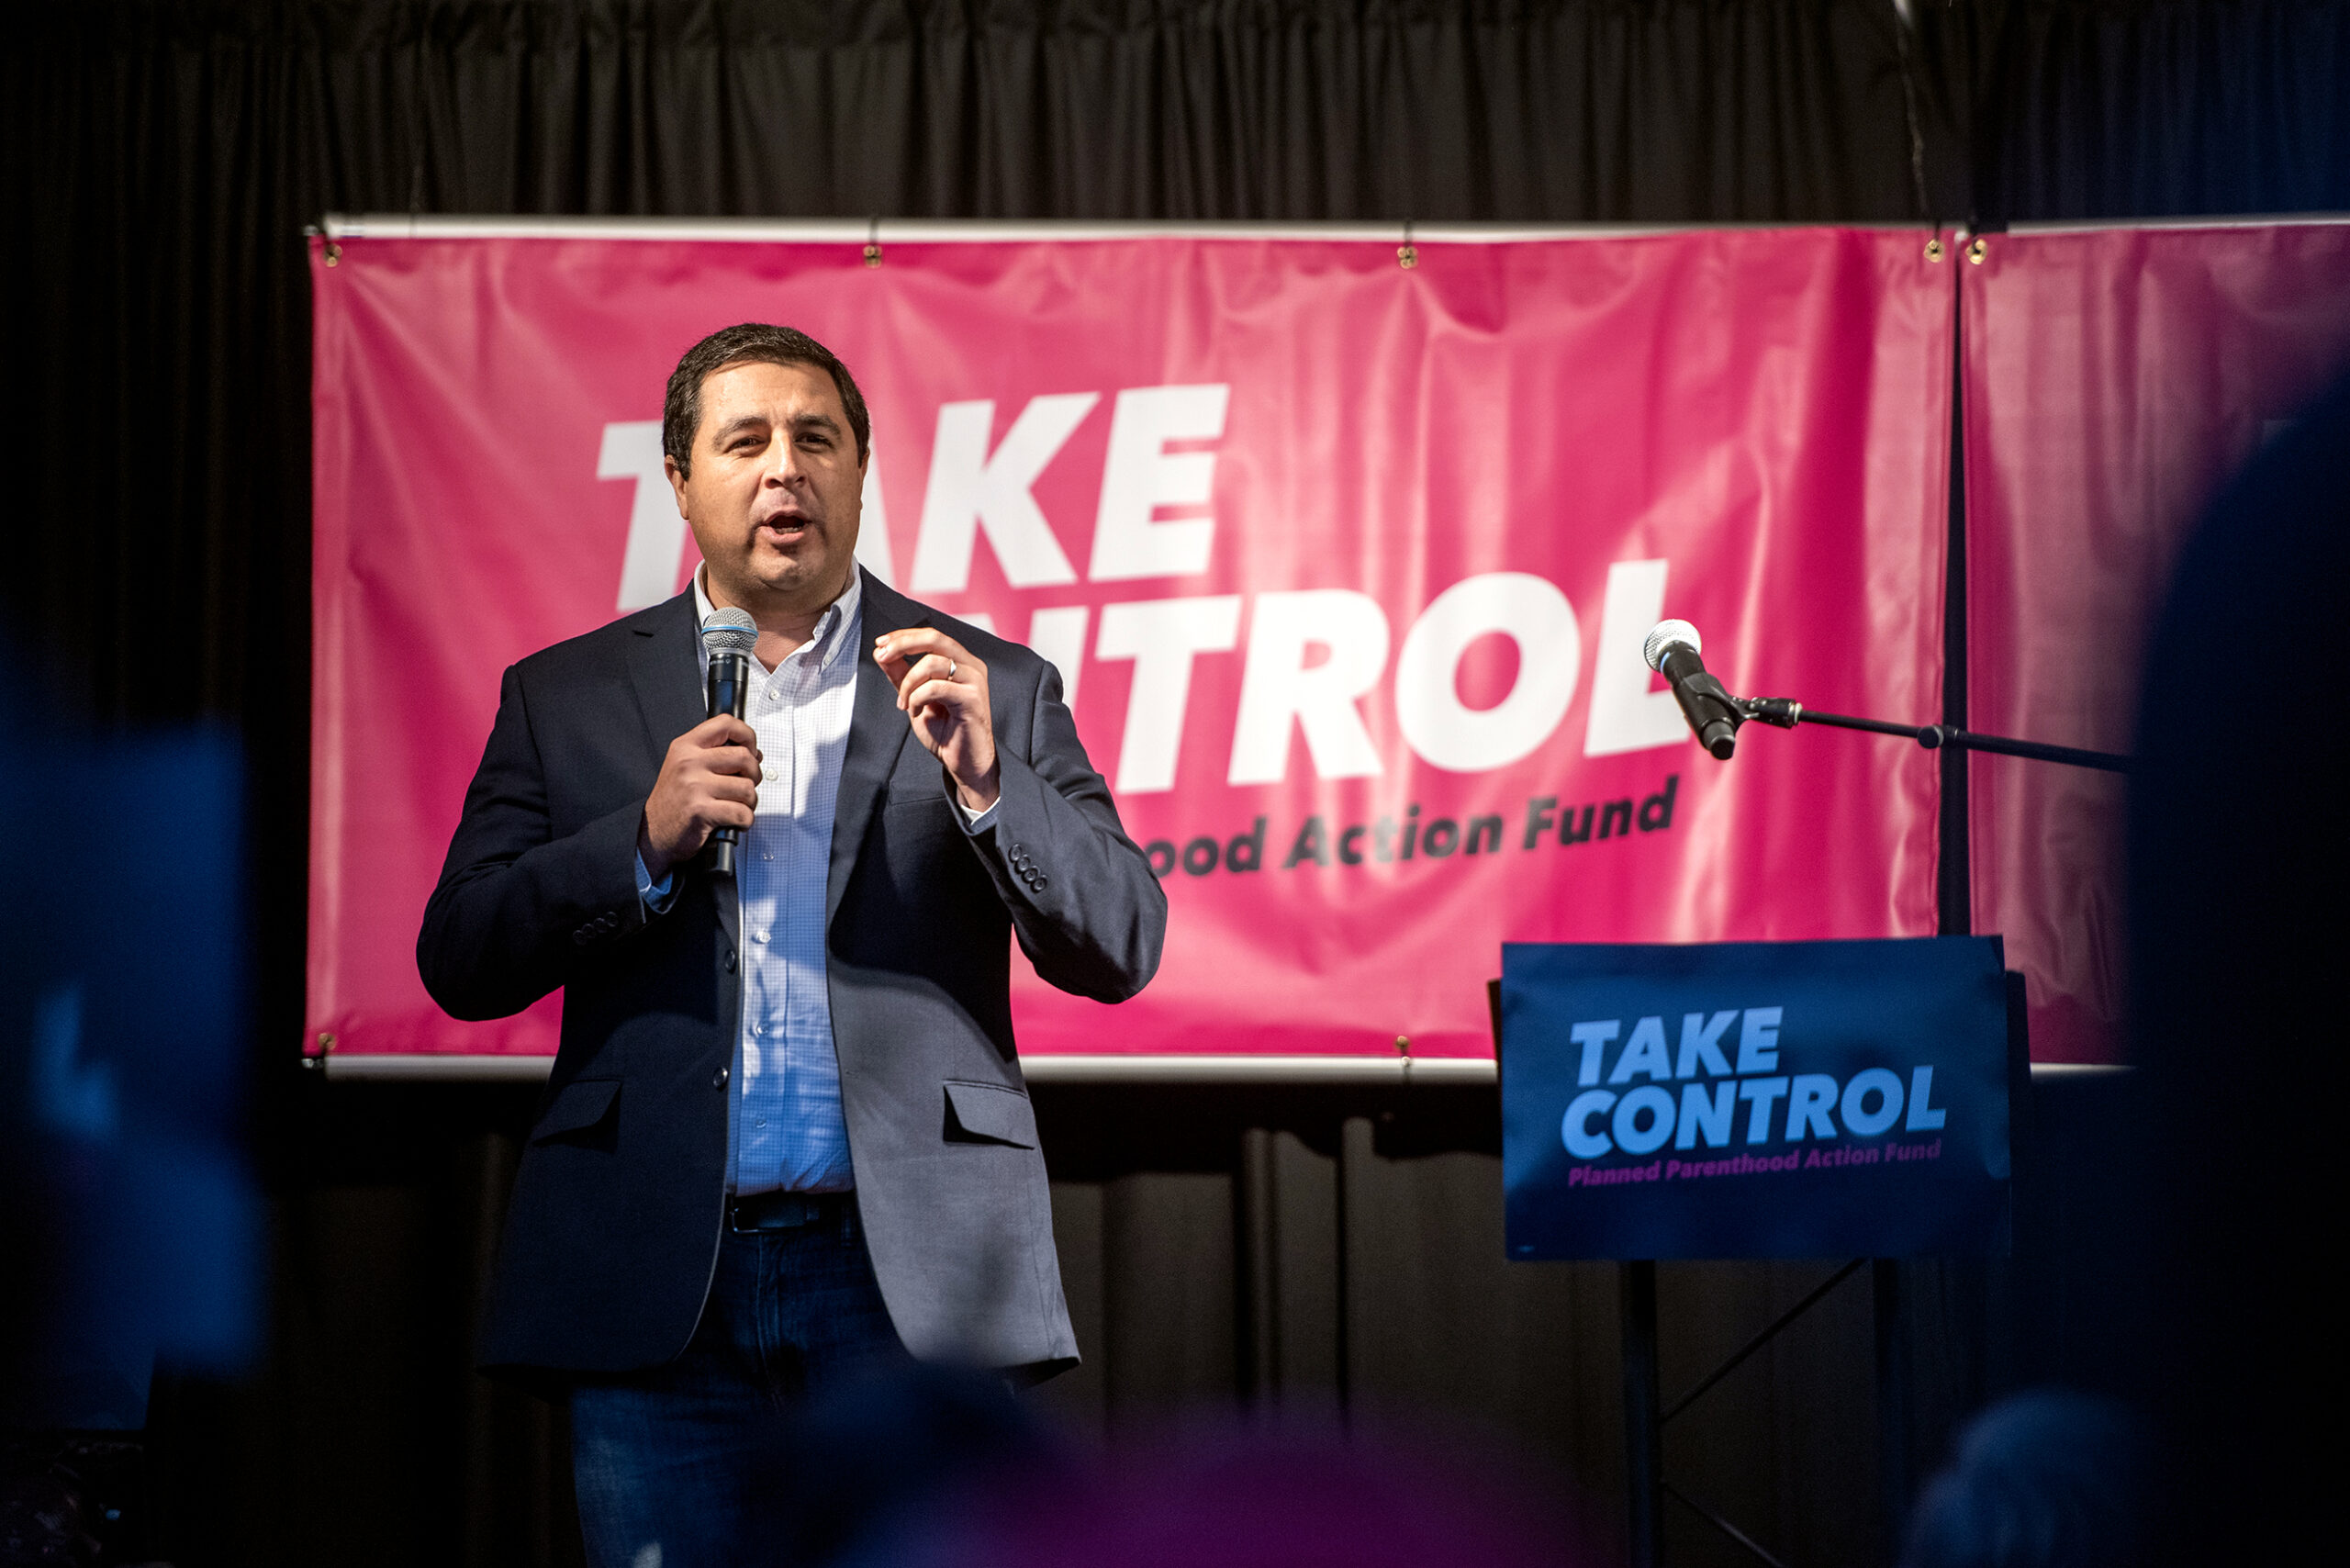 Attorney General Josh Kaul stands in front of a pink Planned Parenthood banner that says 